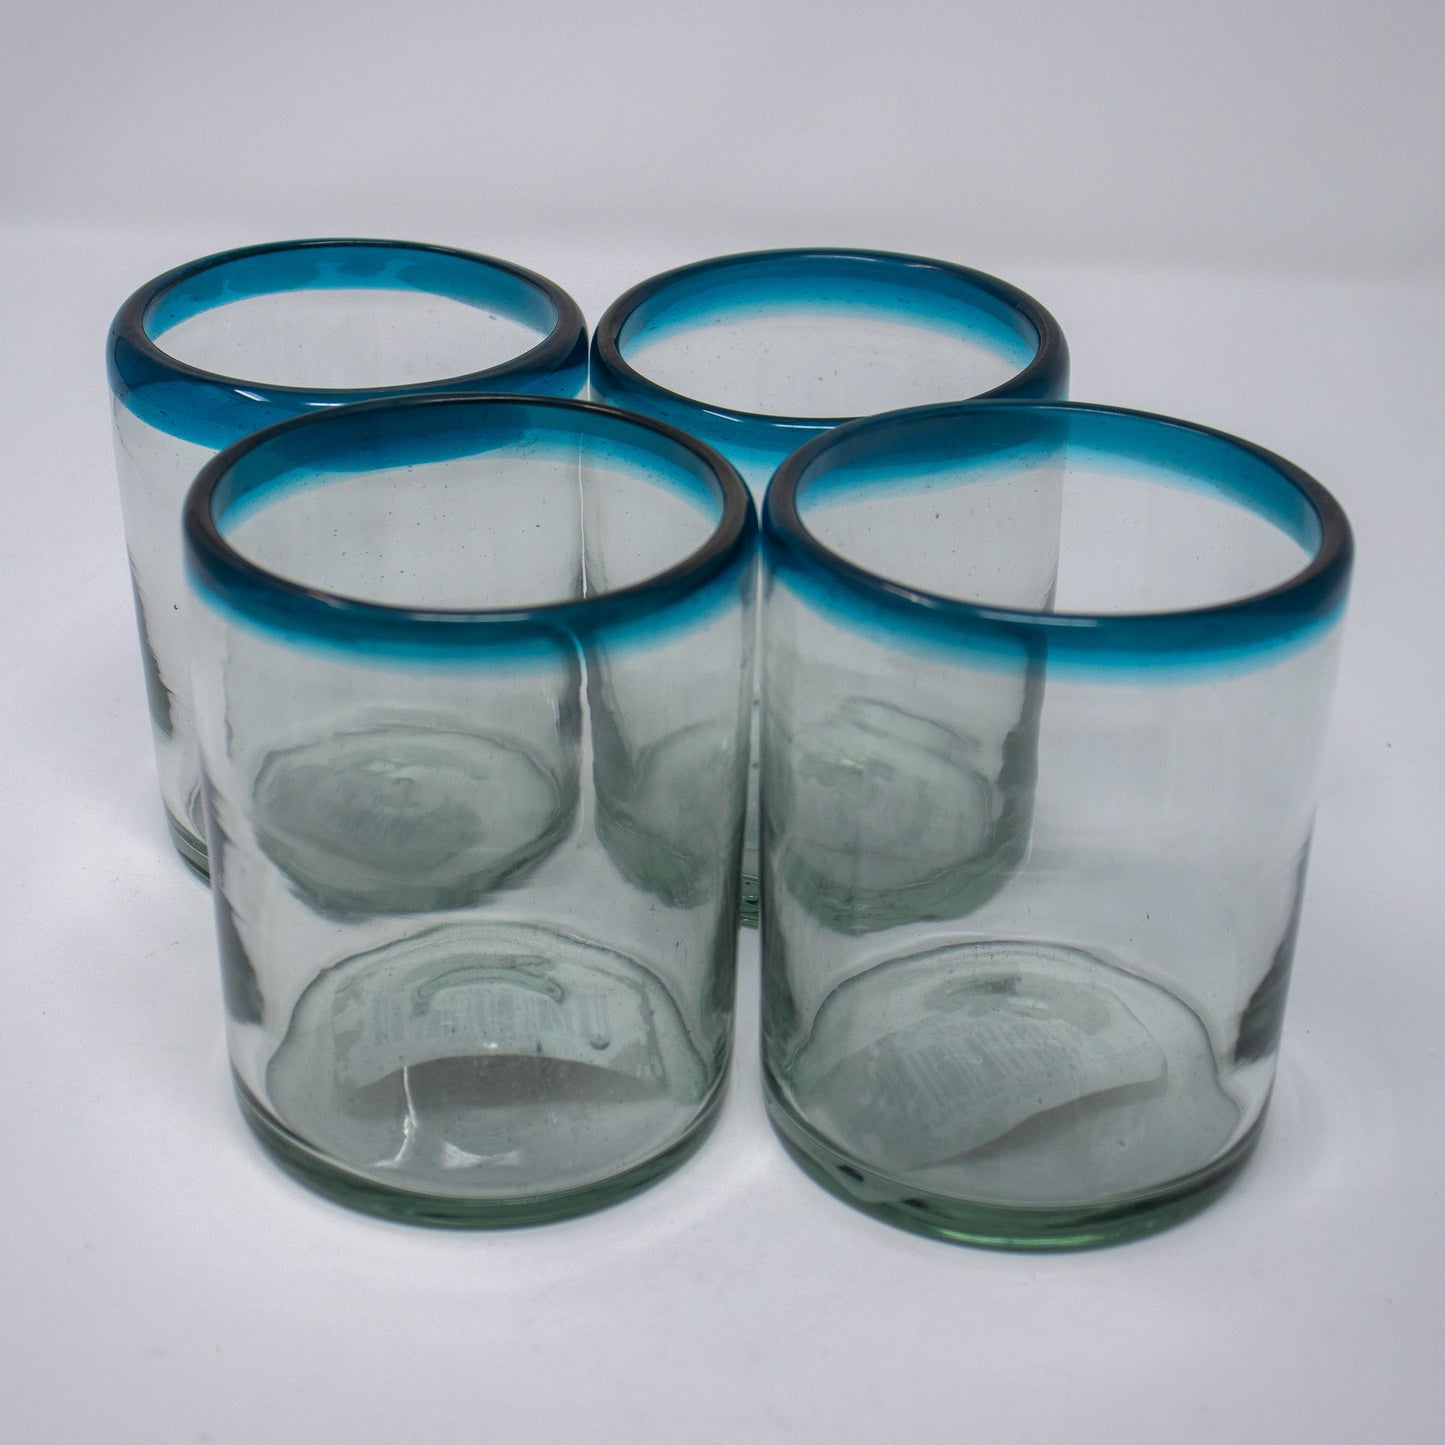 Small Mexican Blue Rim Tumblers (Set of 4)